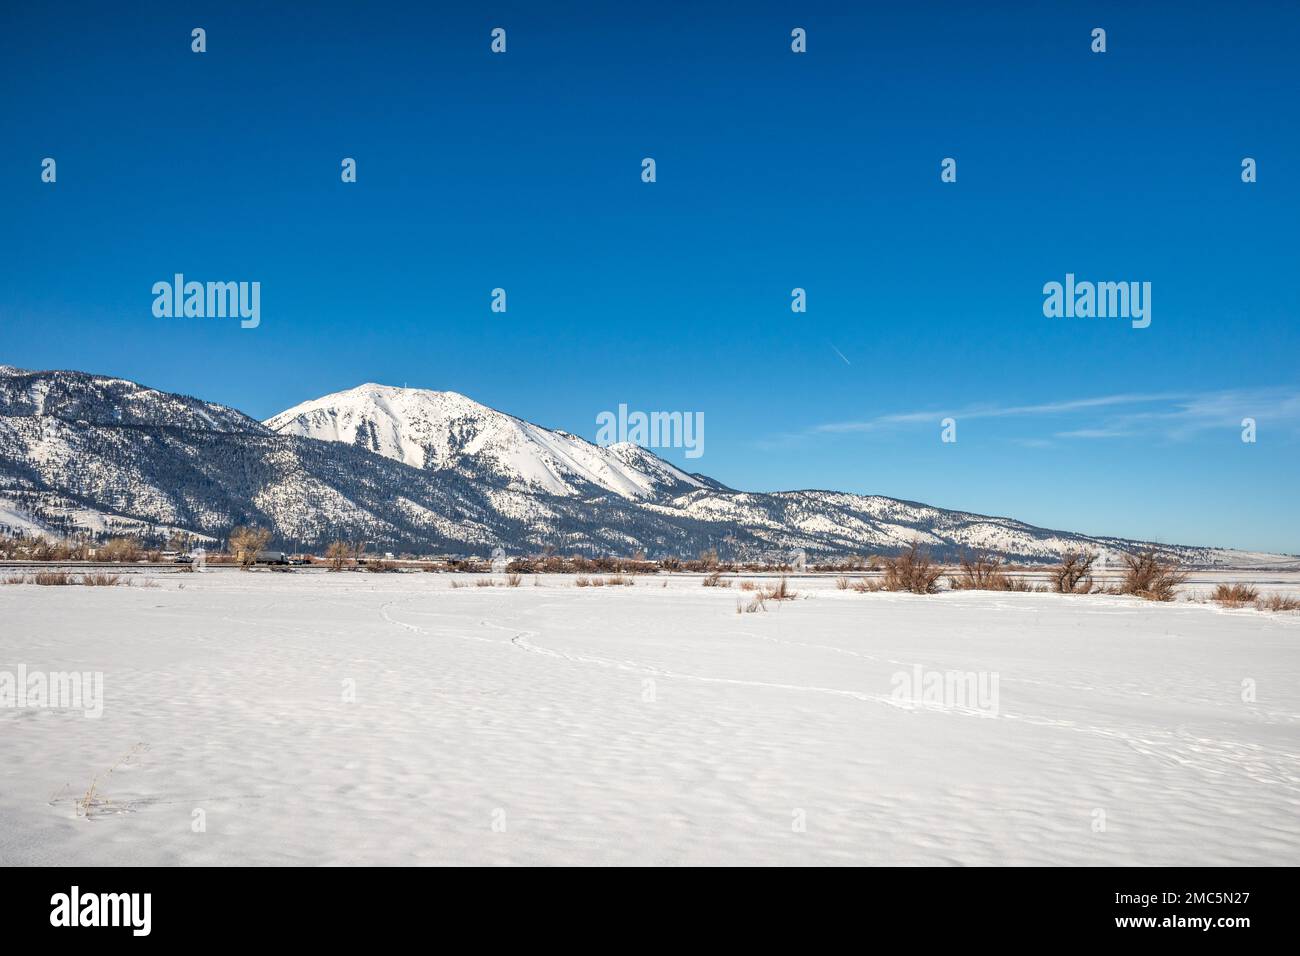 Snow covered frozen landscape with Mt Rose and Slide Mountain, in Washoe Valley between Reno and Carson City Nevada. Stock Photo